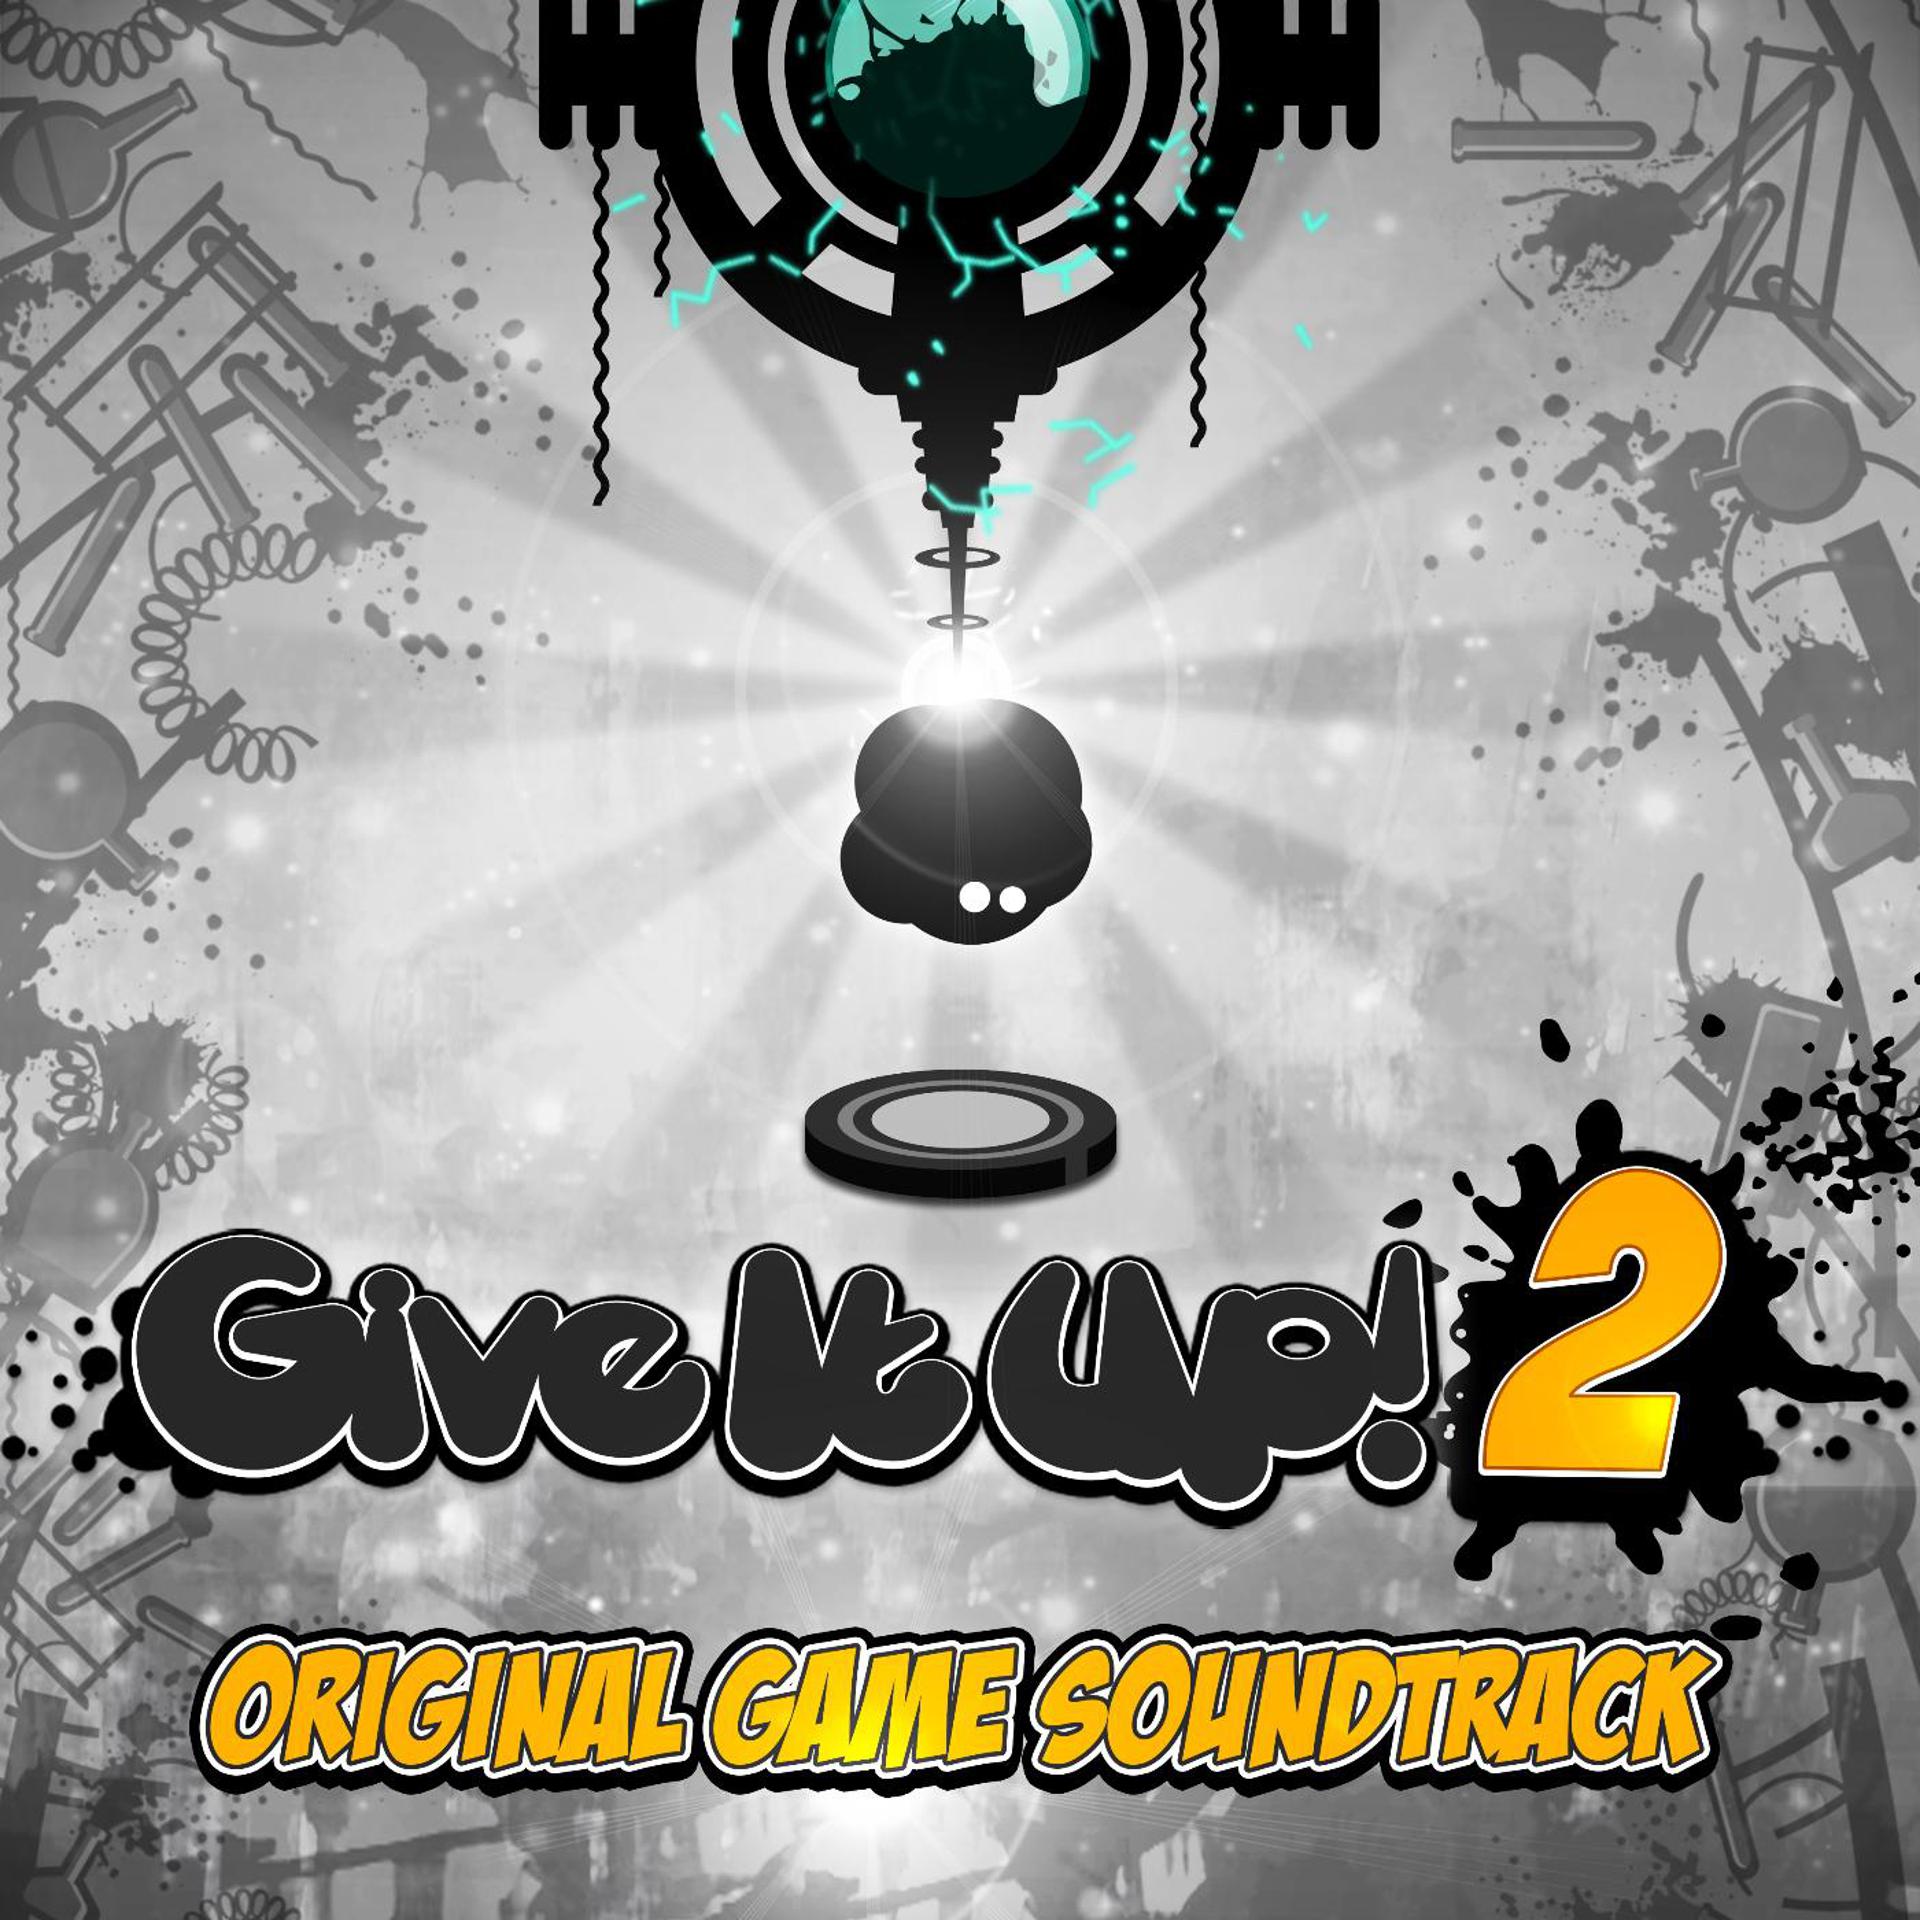 Give my game. Give it up игра. Альбом give it up. Game Music. Give it up 2 игра oynash.